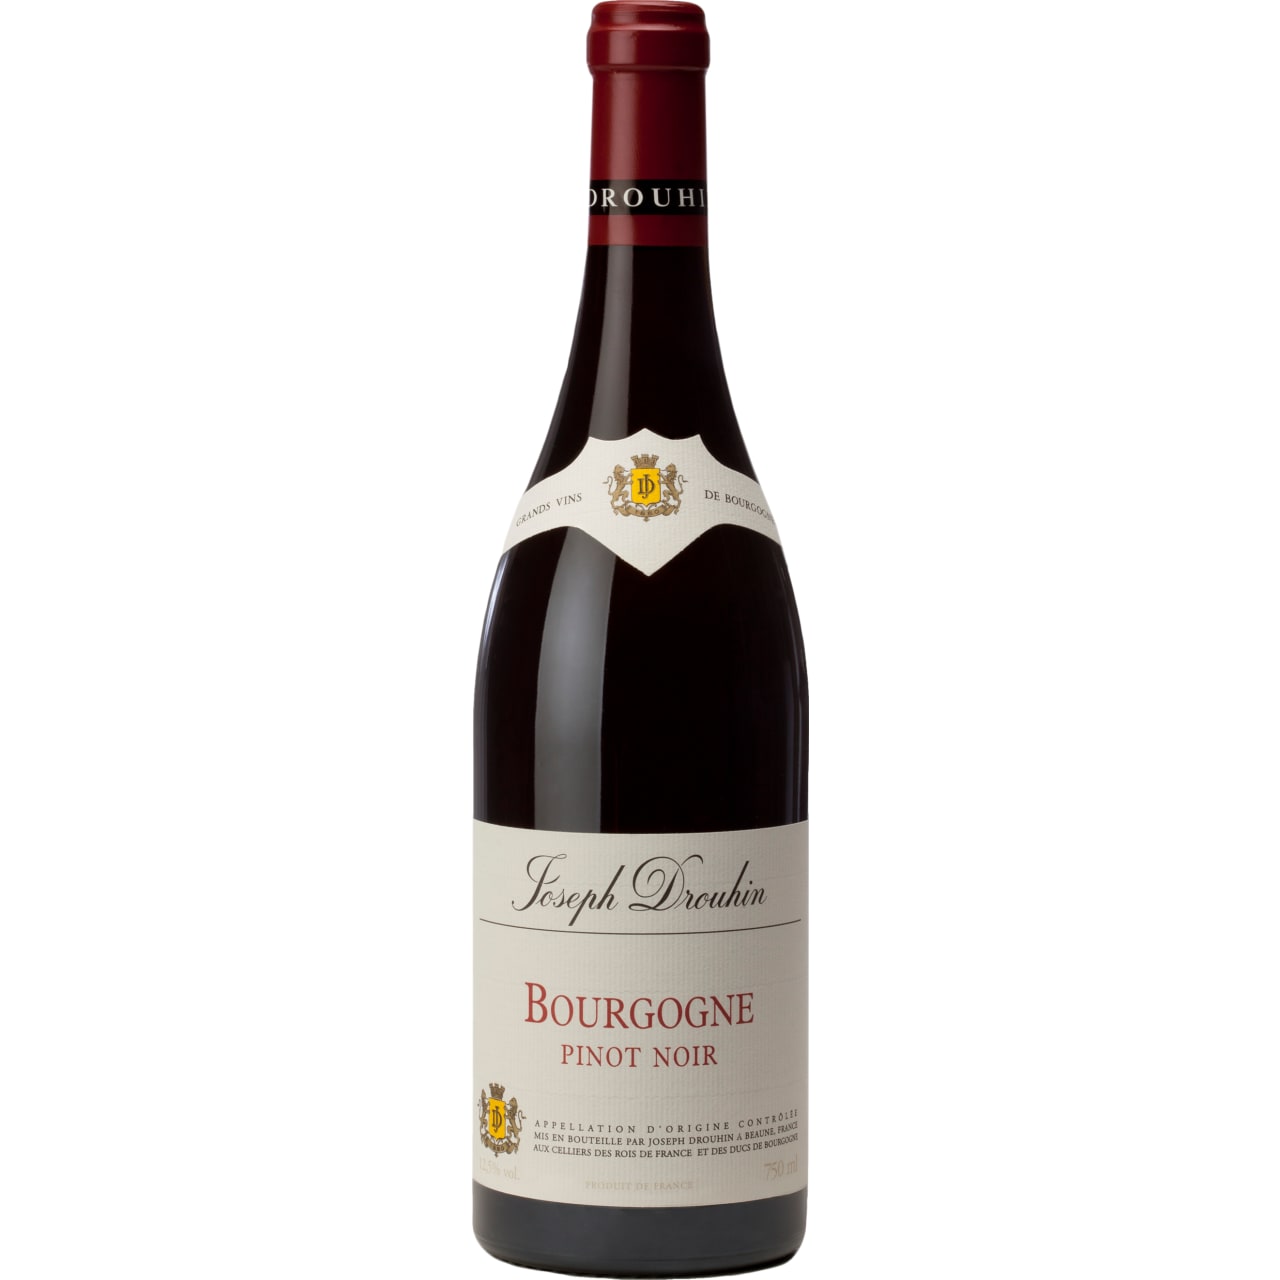 A wine full of charm: bright ruby colour and a nose rich with aromas of red fruit.